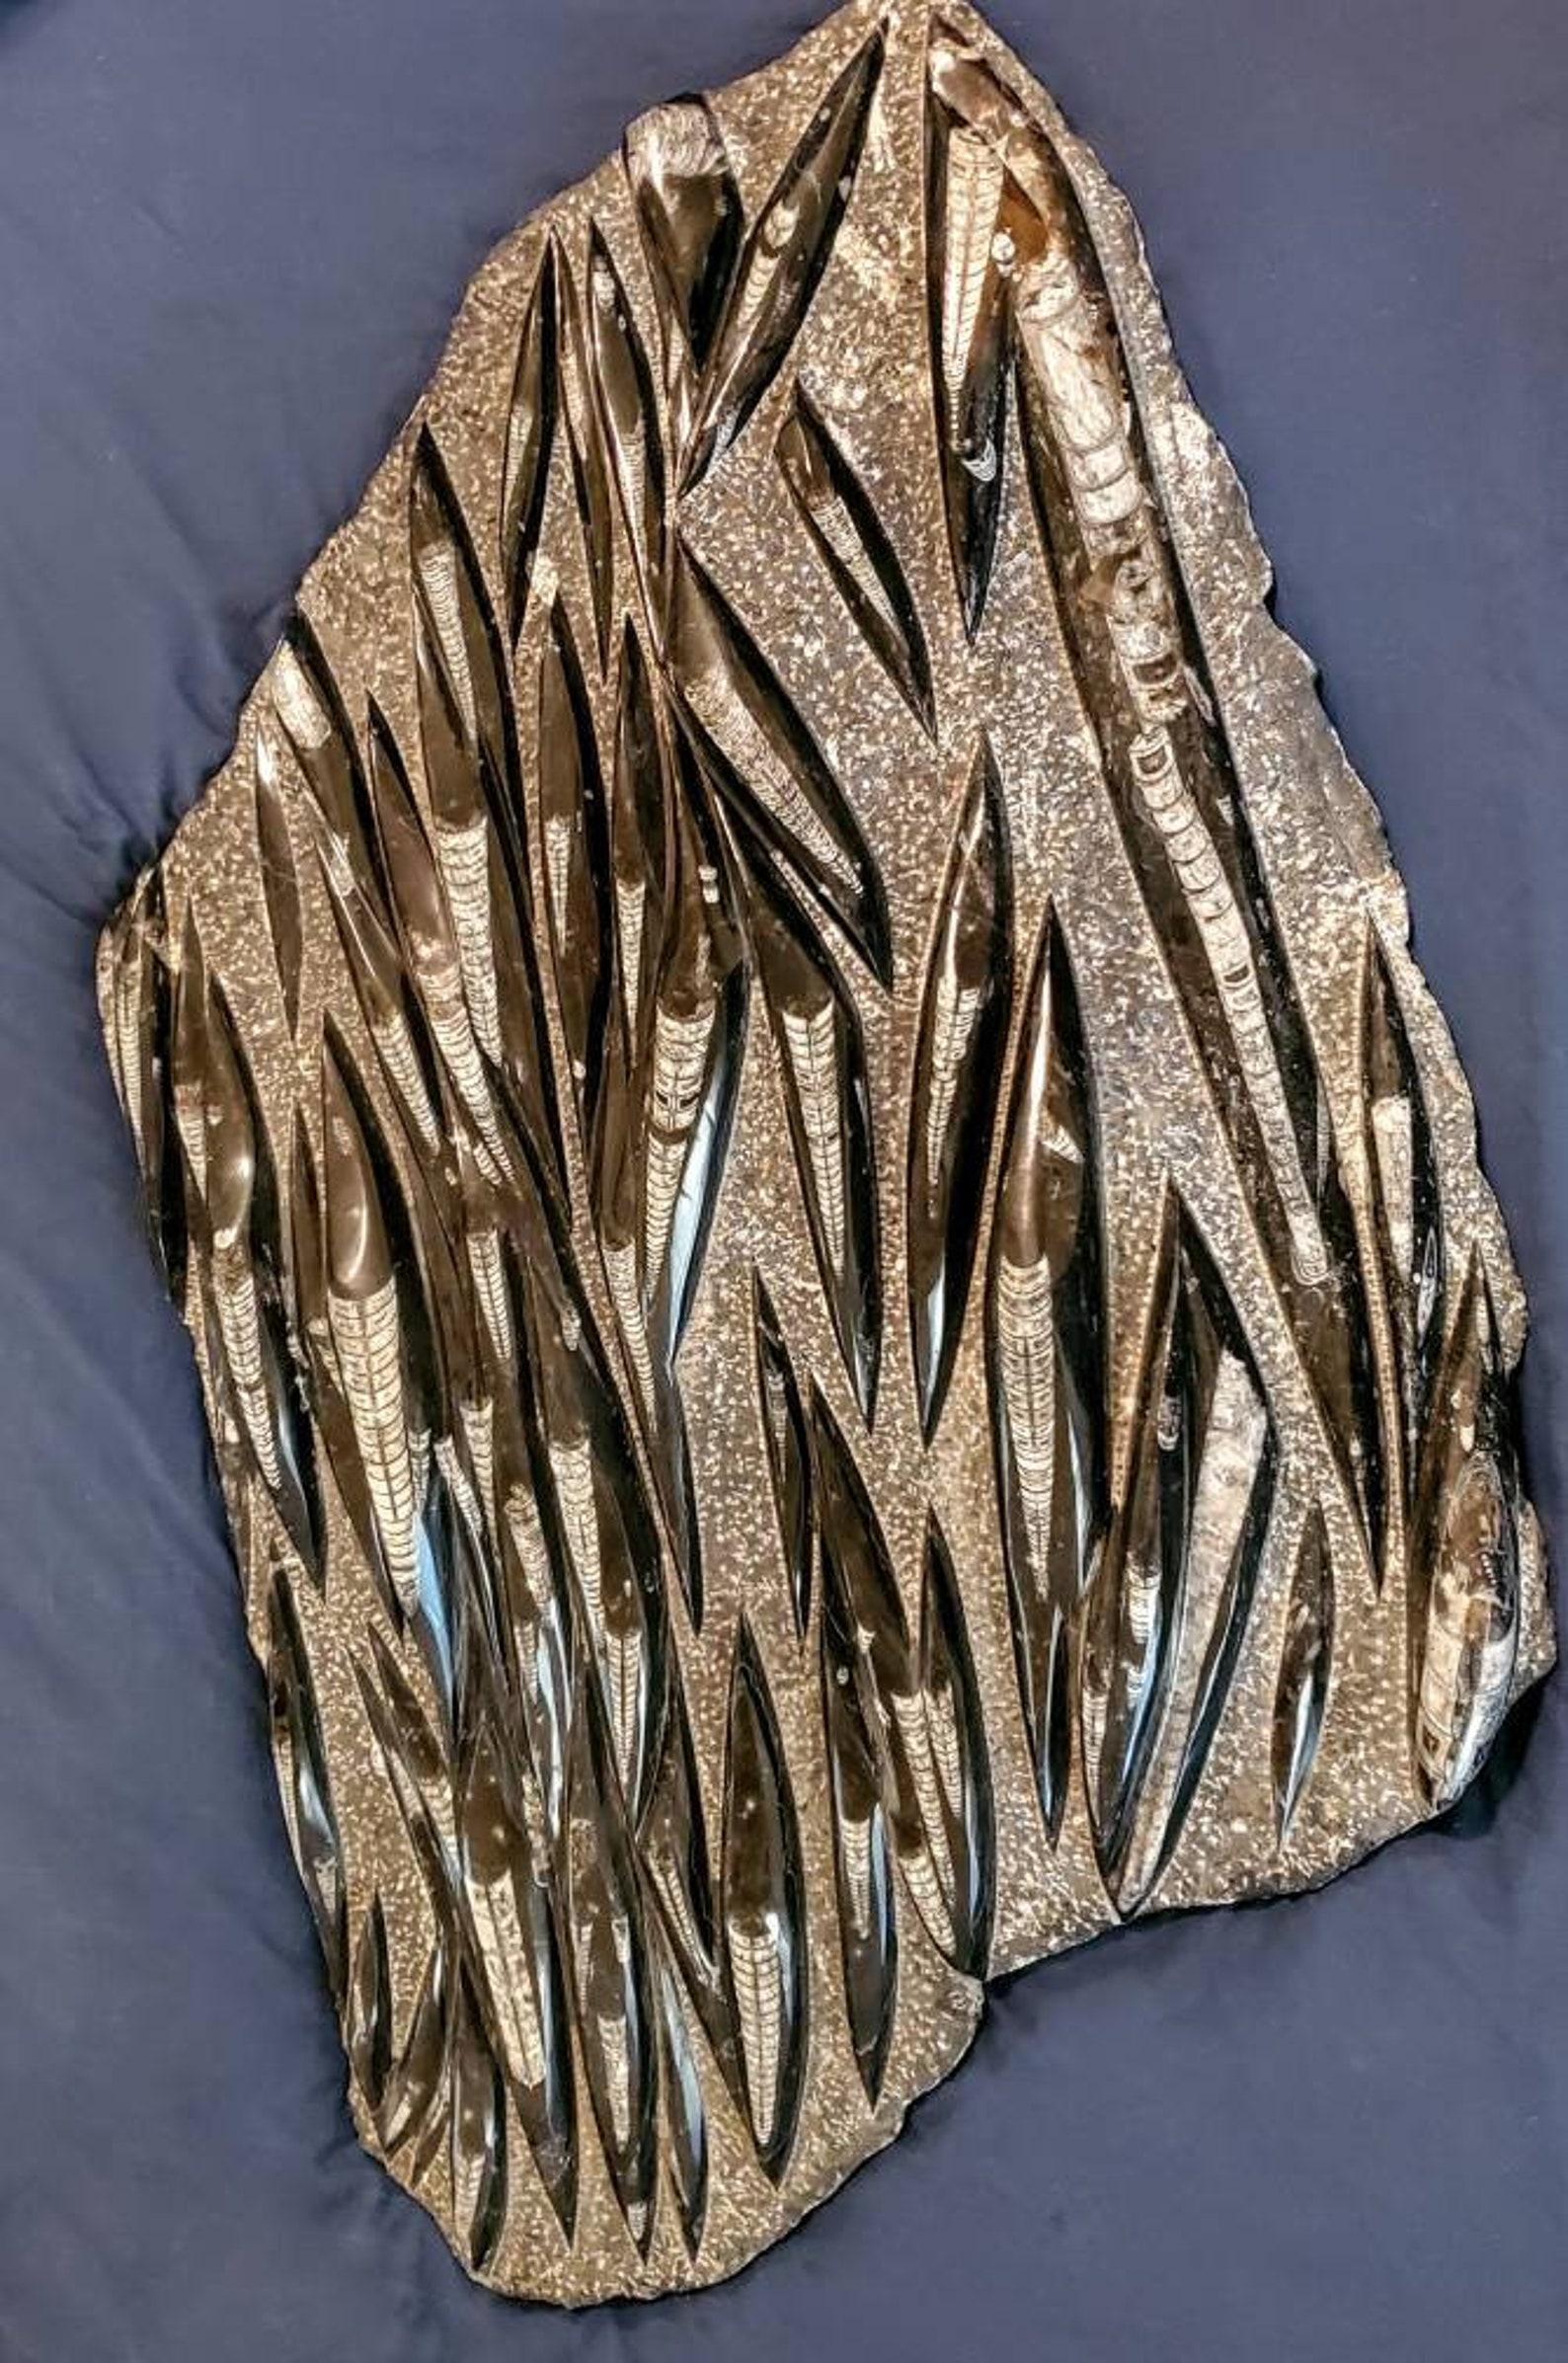 A spectacular large polished orthoceras fossil plate, with numerous orthoceras embedded in ancient rock surface.

Provenance: 
Eight Point Ranch, Elgin, Texas

Dimensions (approx):
40